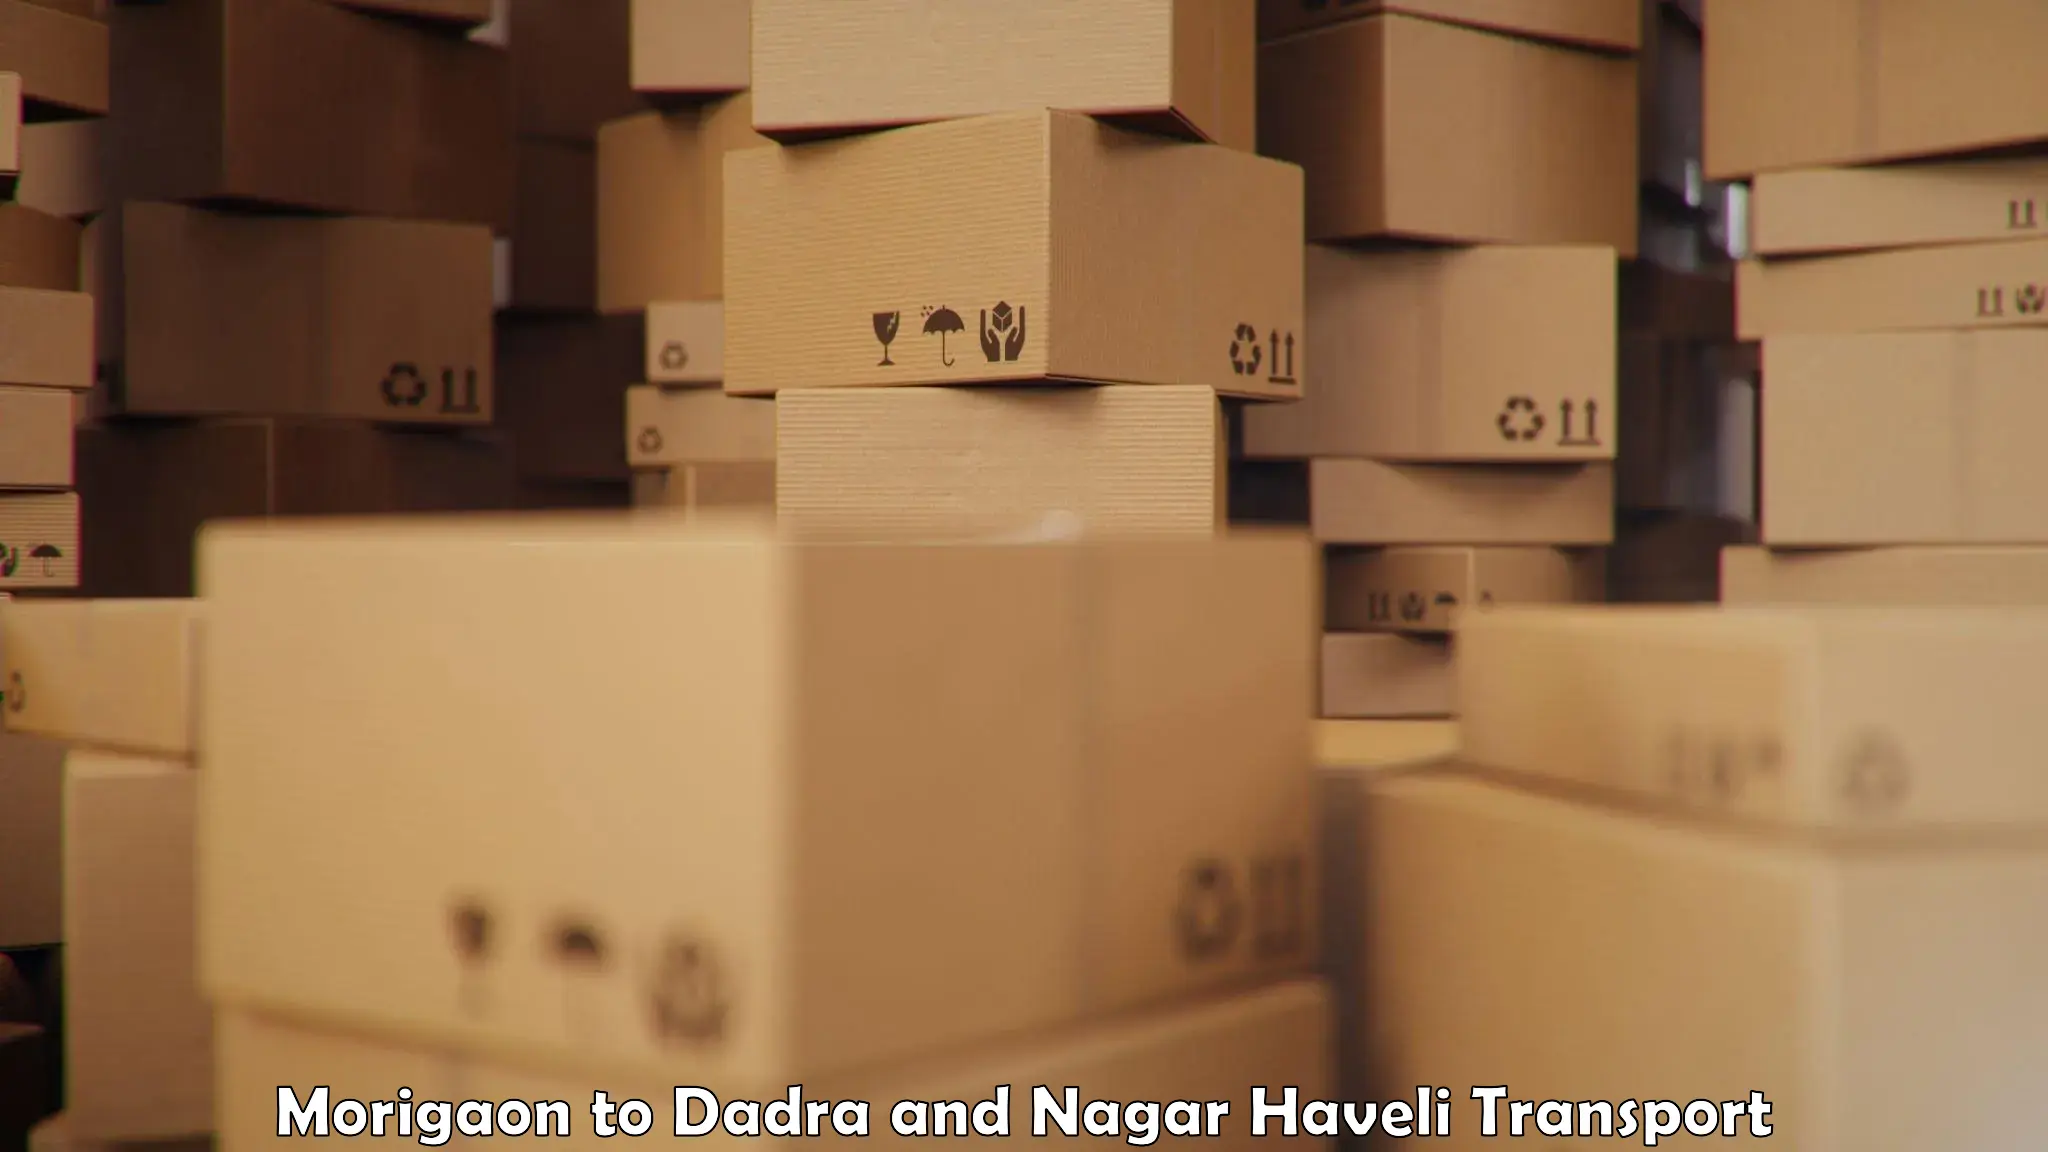 Container transport service in Morigaon to Dadra and Nagar Haveli